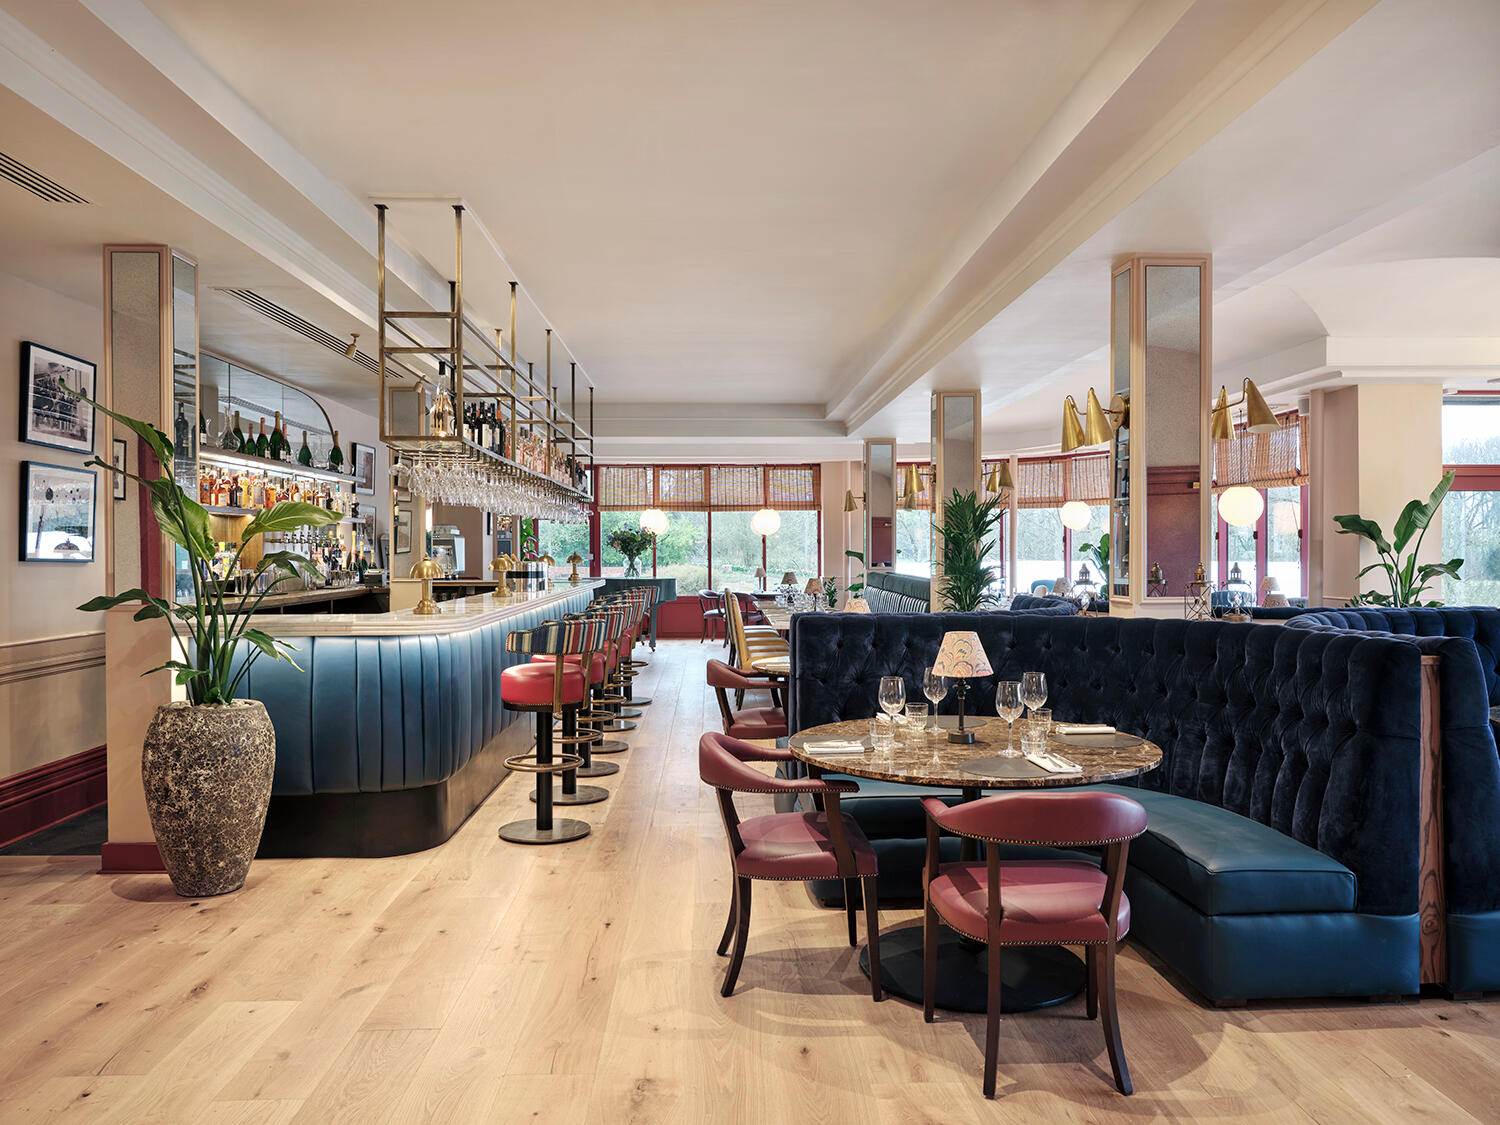 The 1772 Brasserie | The Retreat at Elcot Park, Berkshire